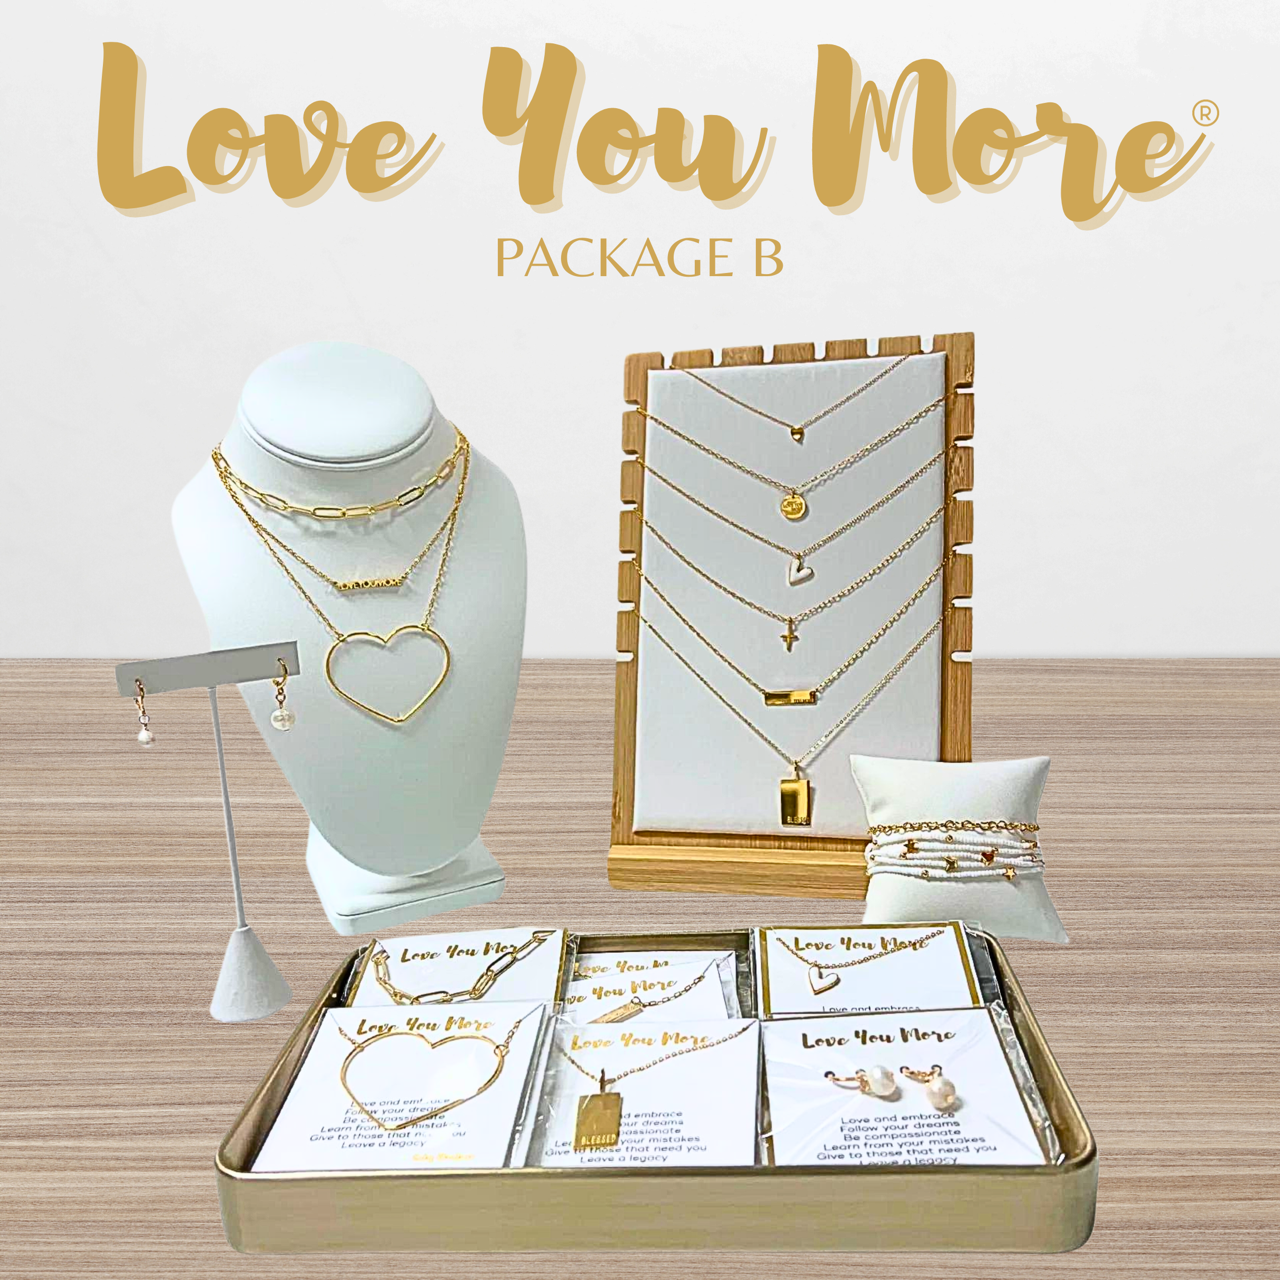 Love You More - Package B